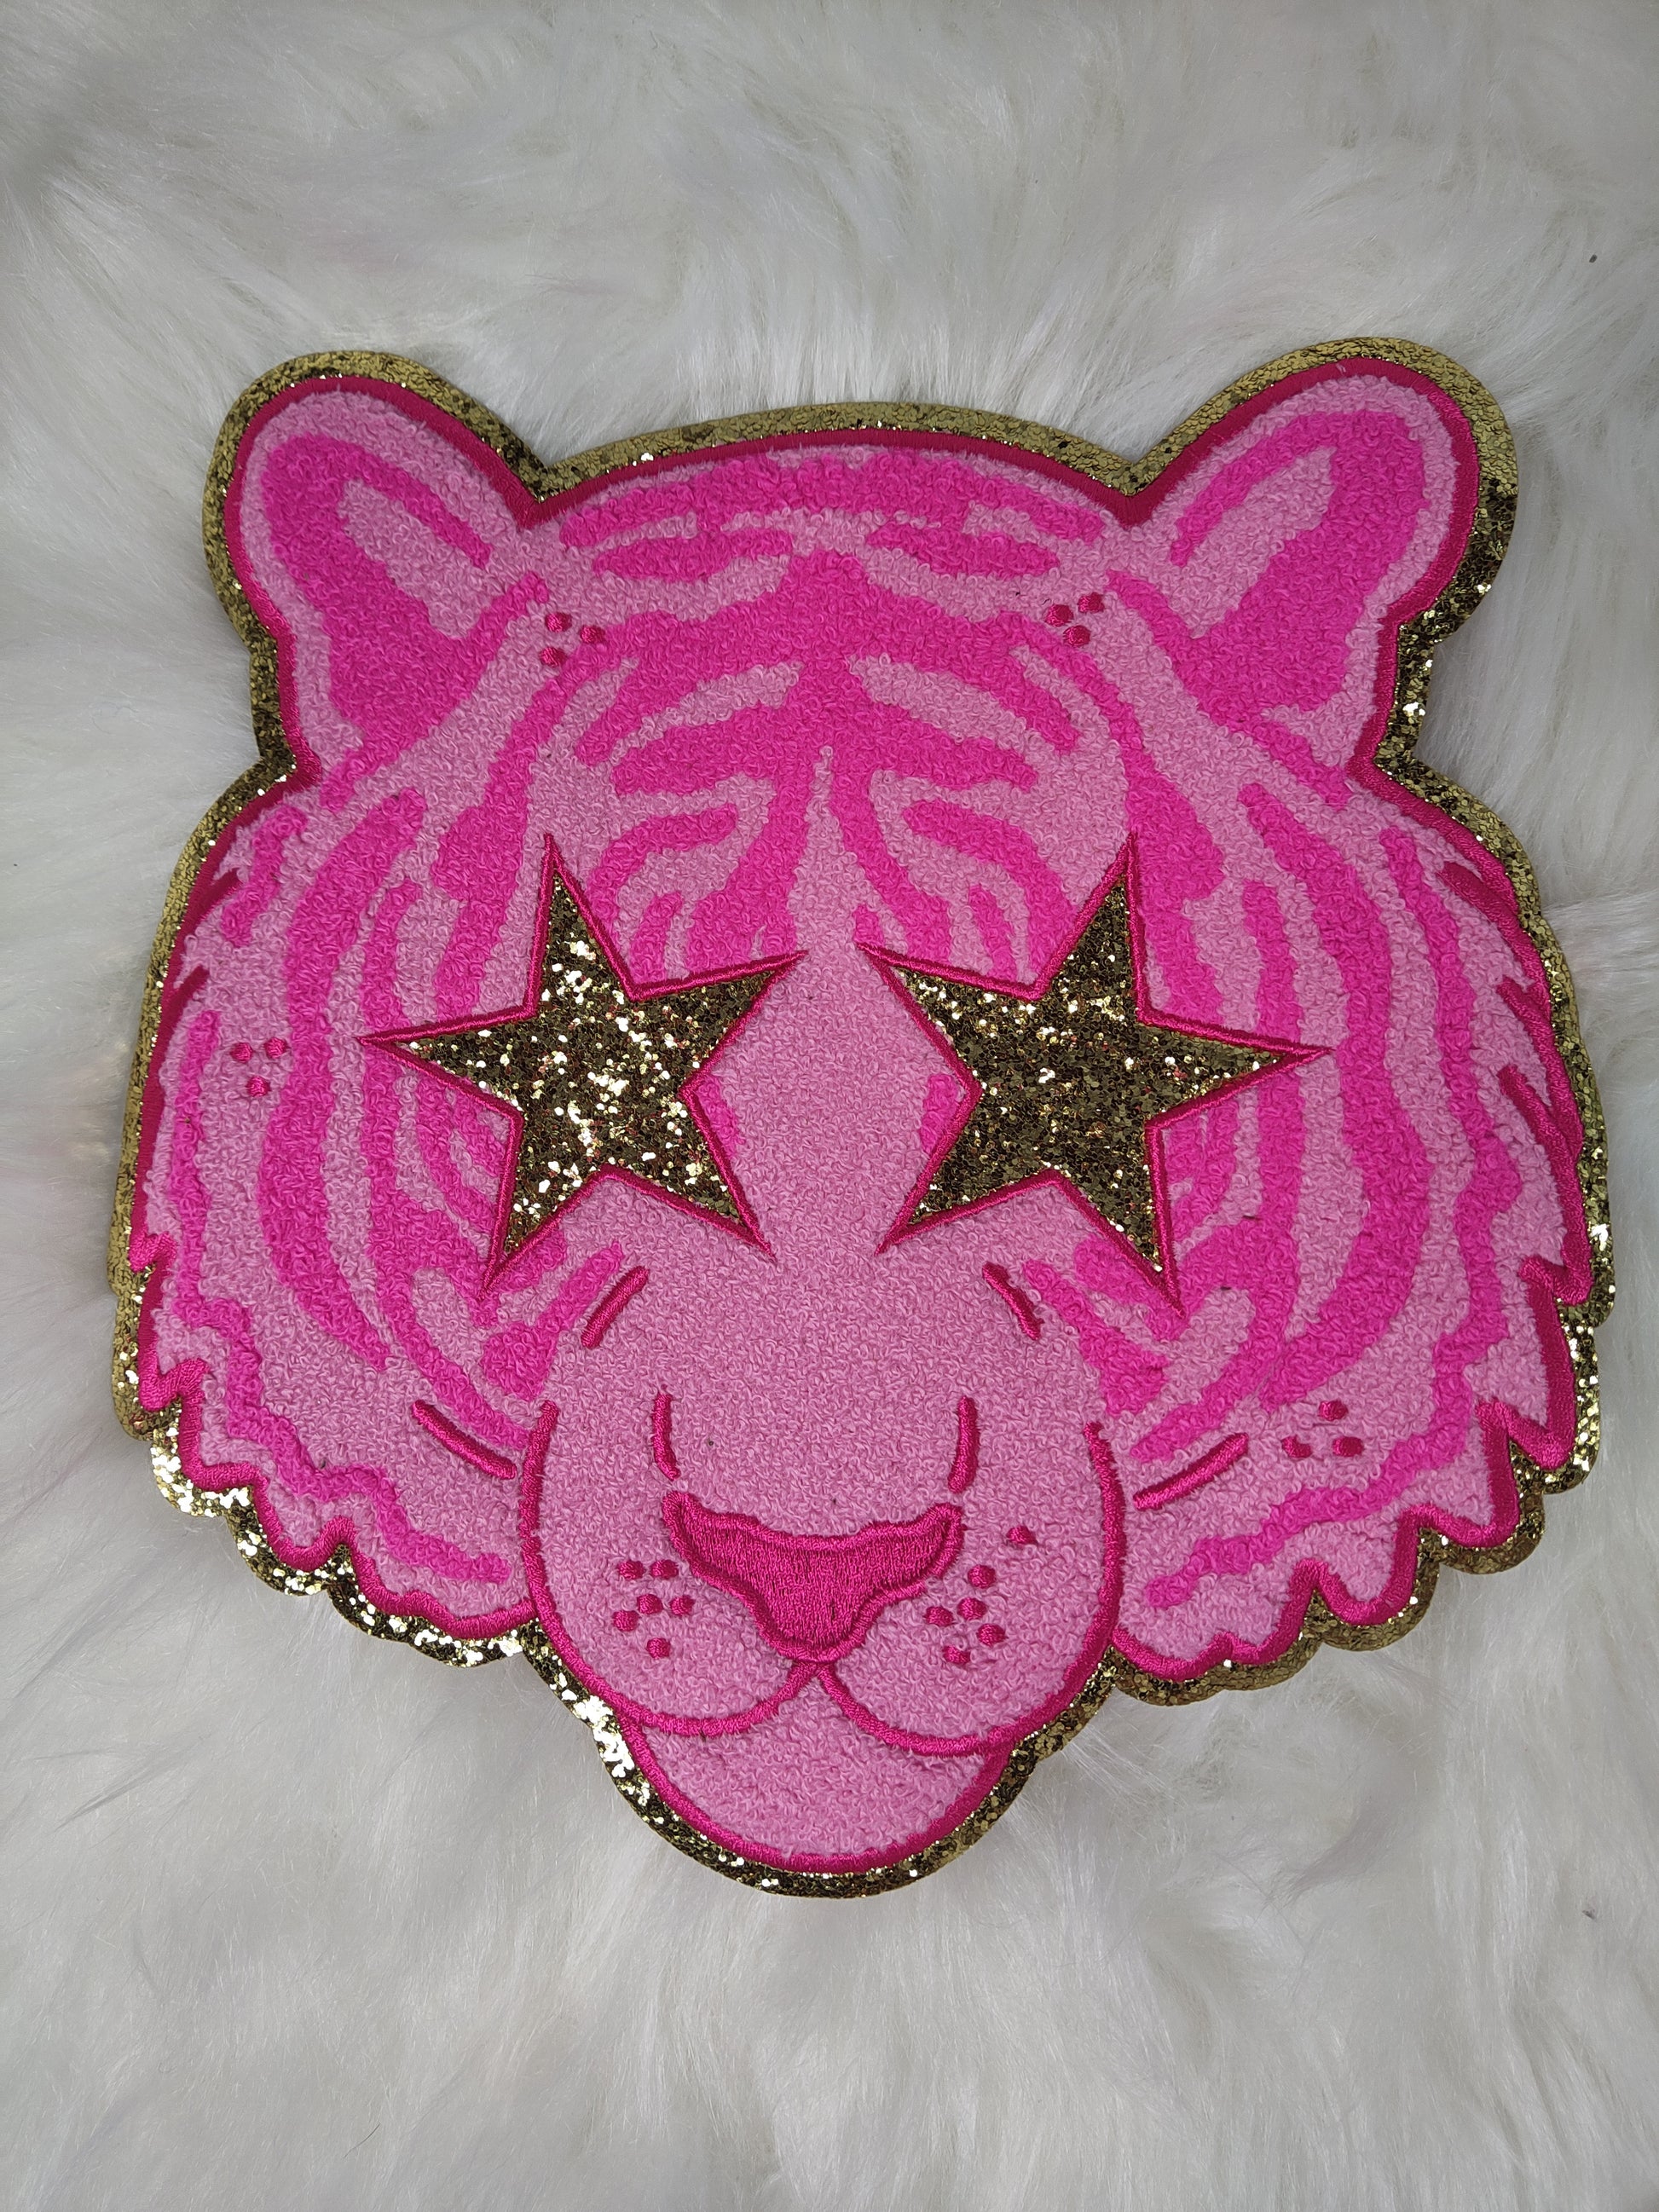 Pink Cheetah Applique Iron On Patches For Clothing Repair And